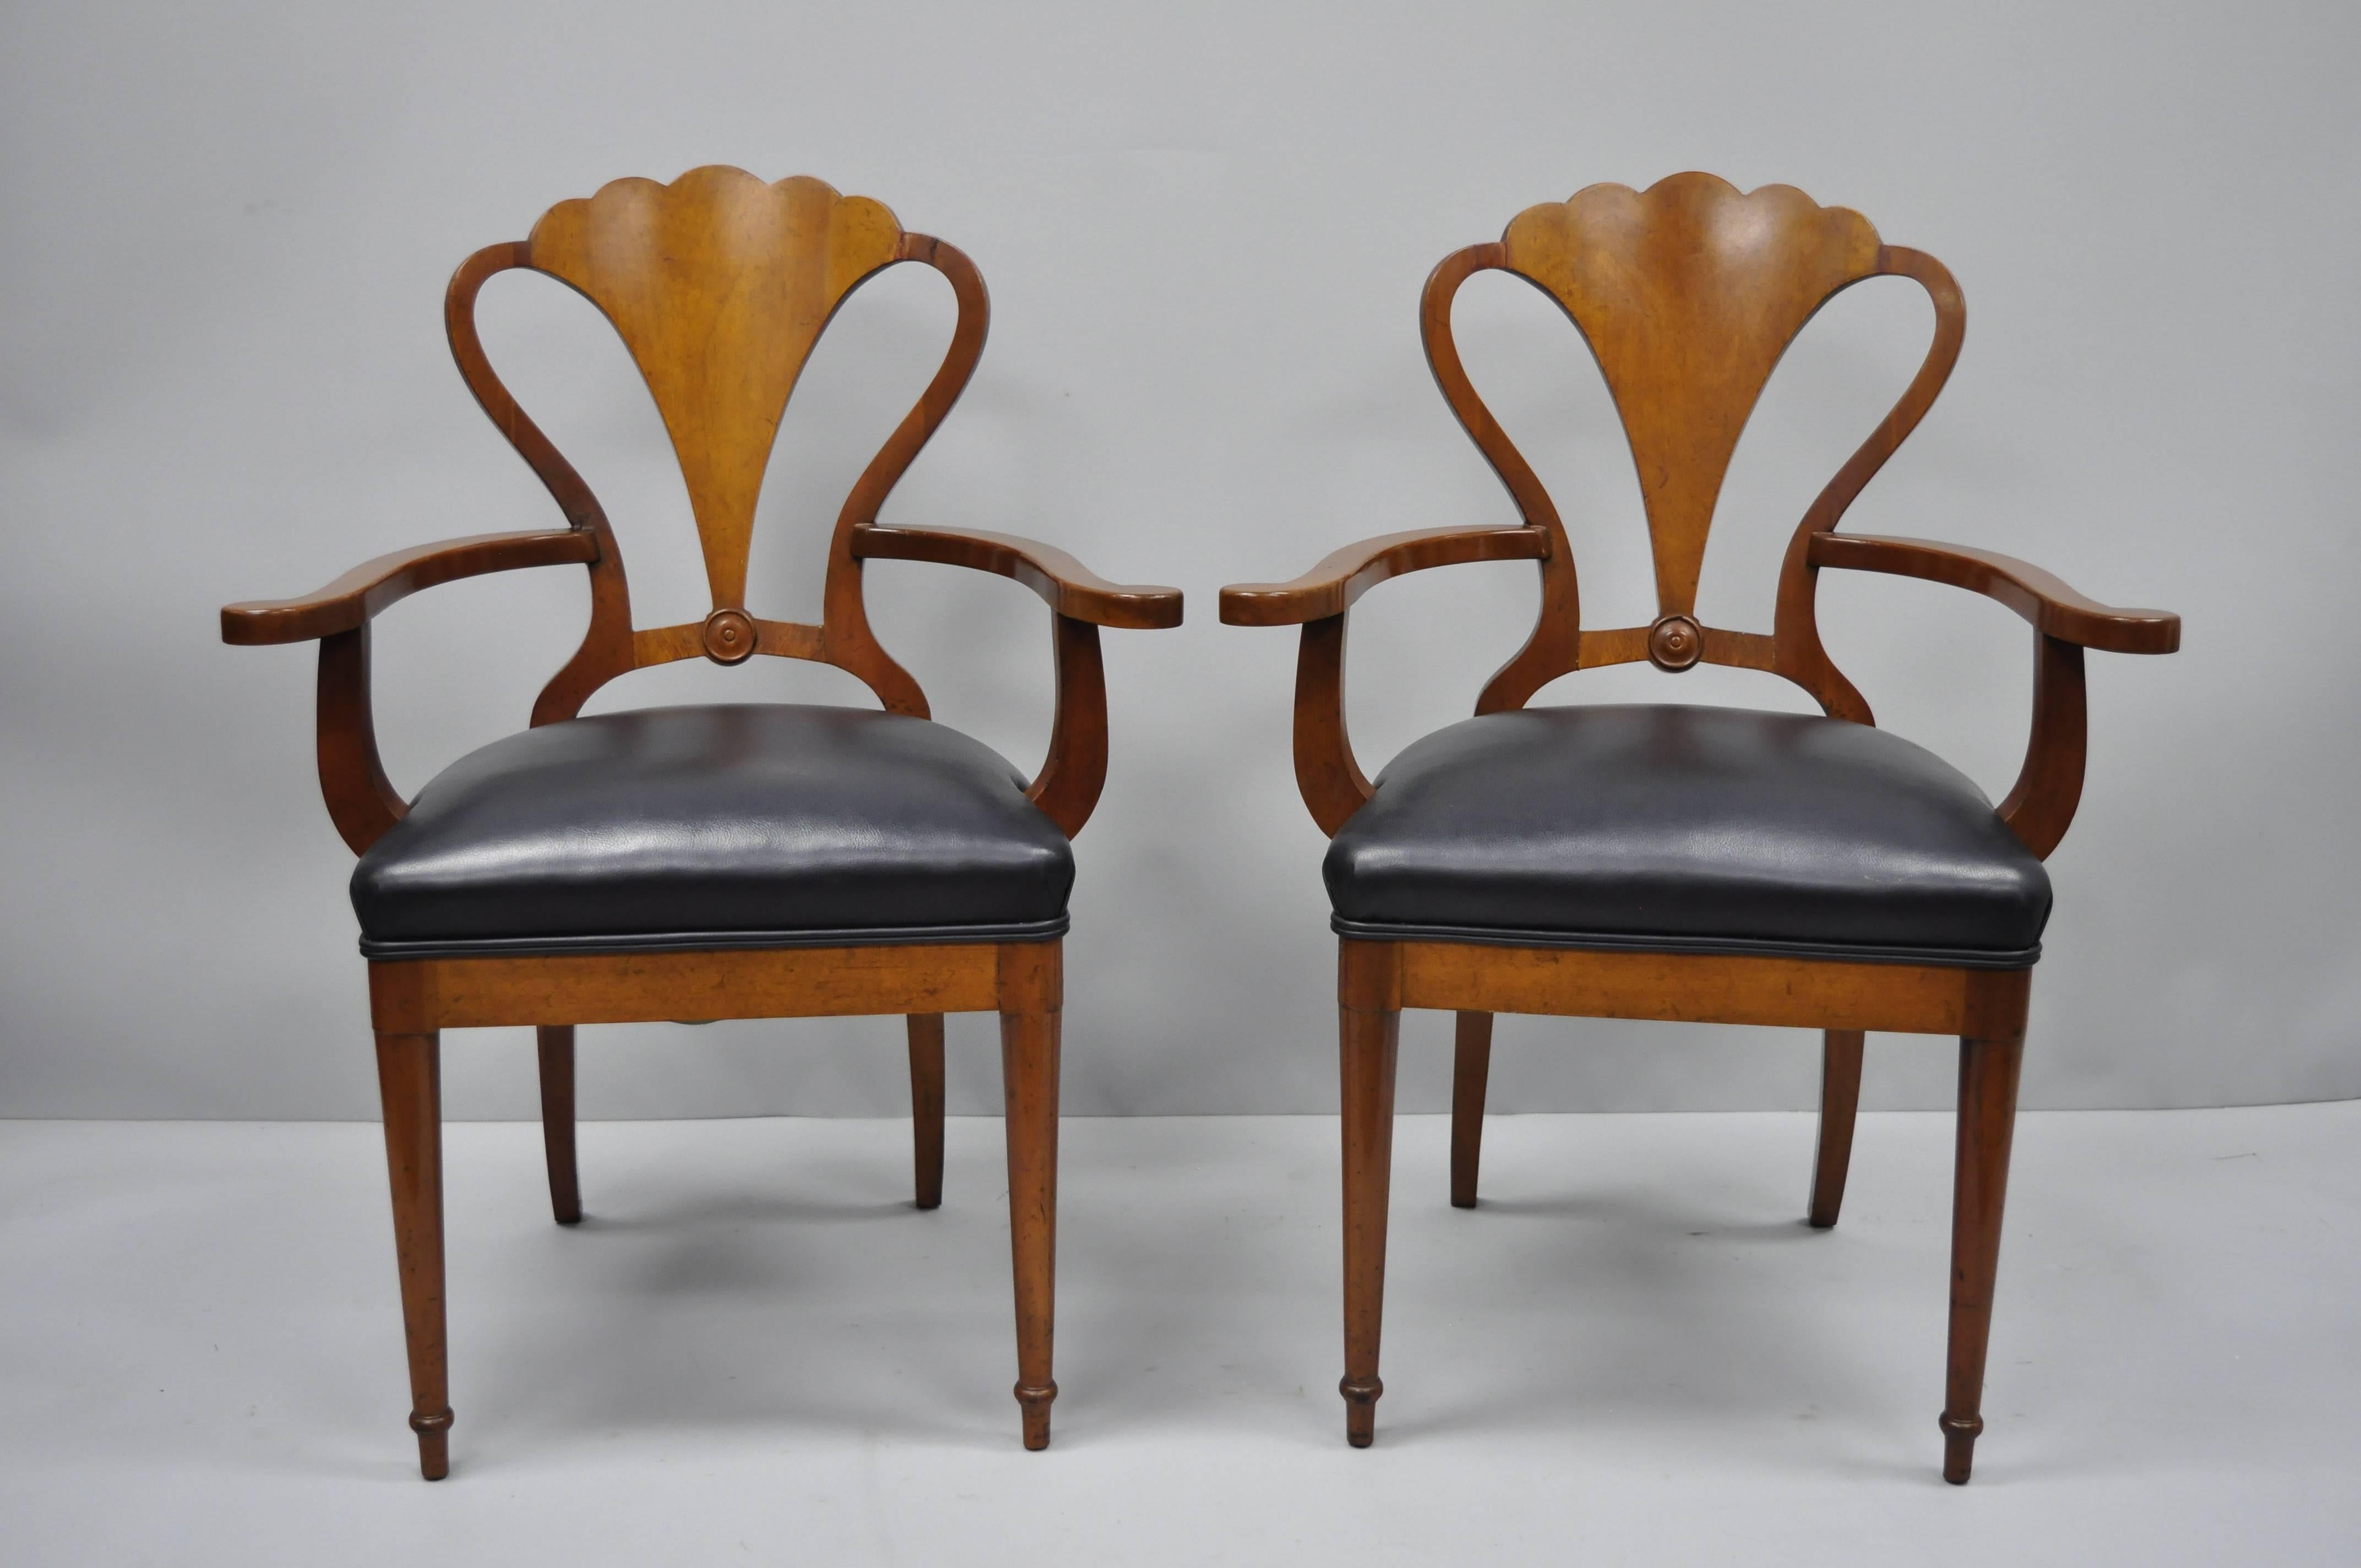 Set of six antique mahogany Biedermeier or neoclassical style shell fan back dining chairs. Item details carved fan/ shell backs, two armchairs, four side chairs, solid wood frames, vinyl upholstered seats, nicely carved details, tapered legs, sleek